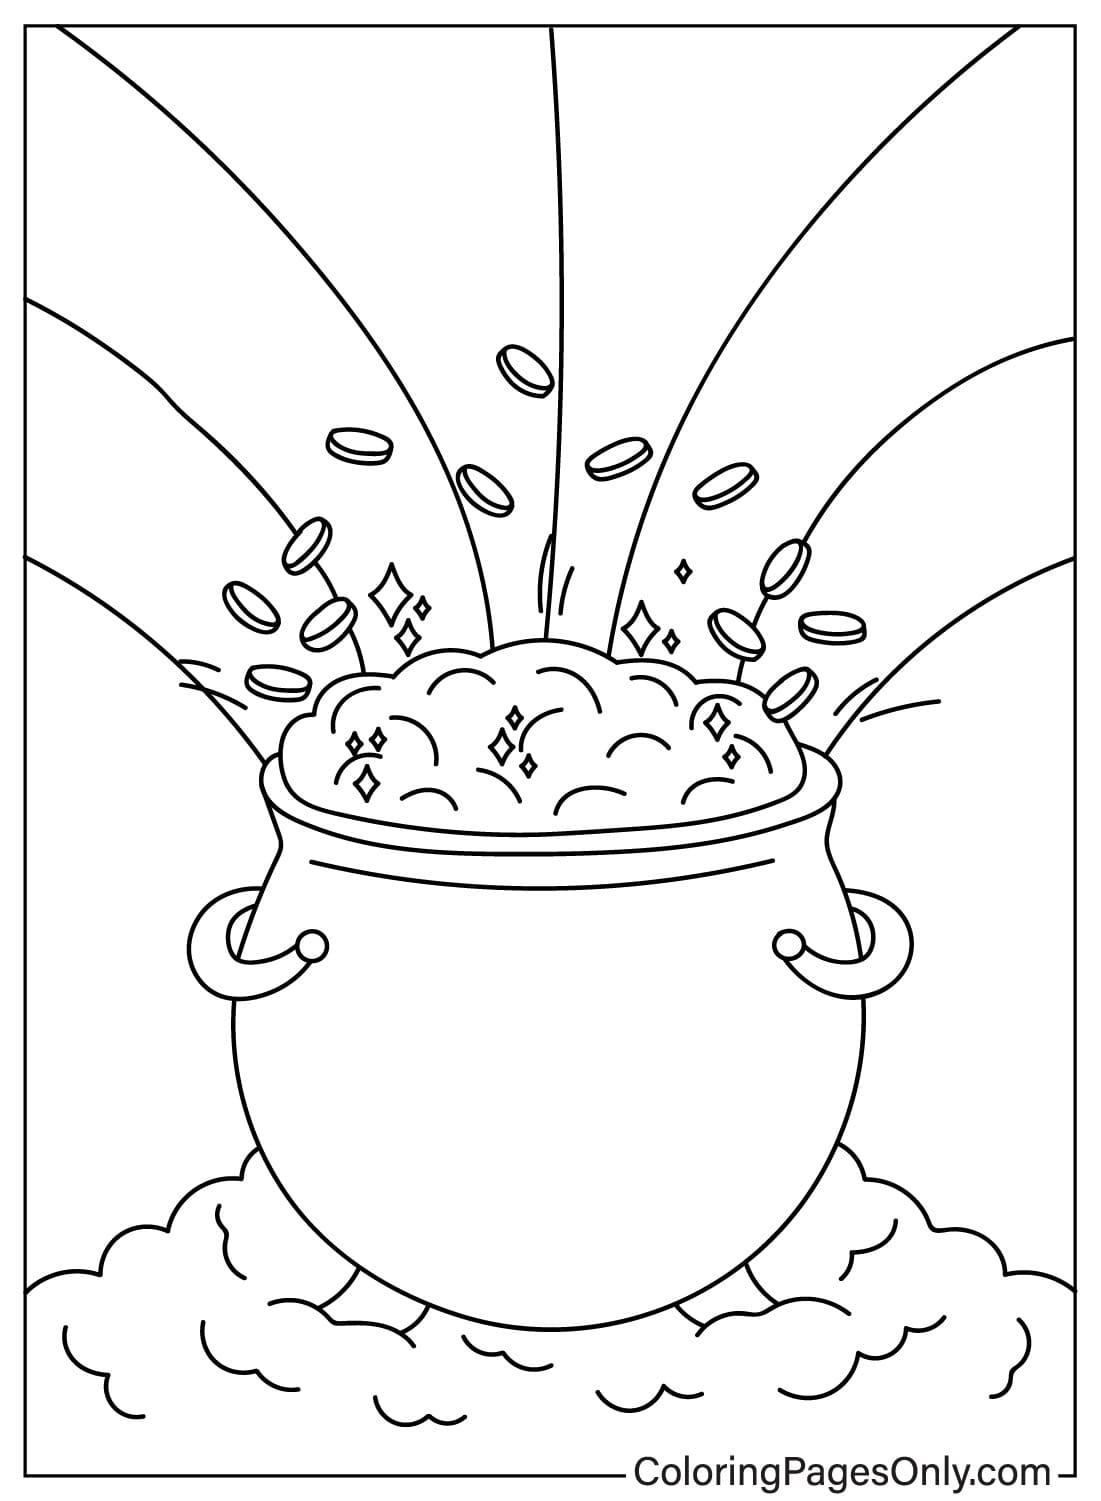 Free Pot of Gold Coloring Page